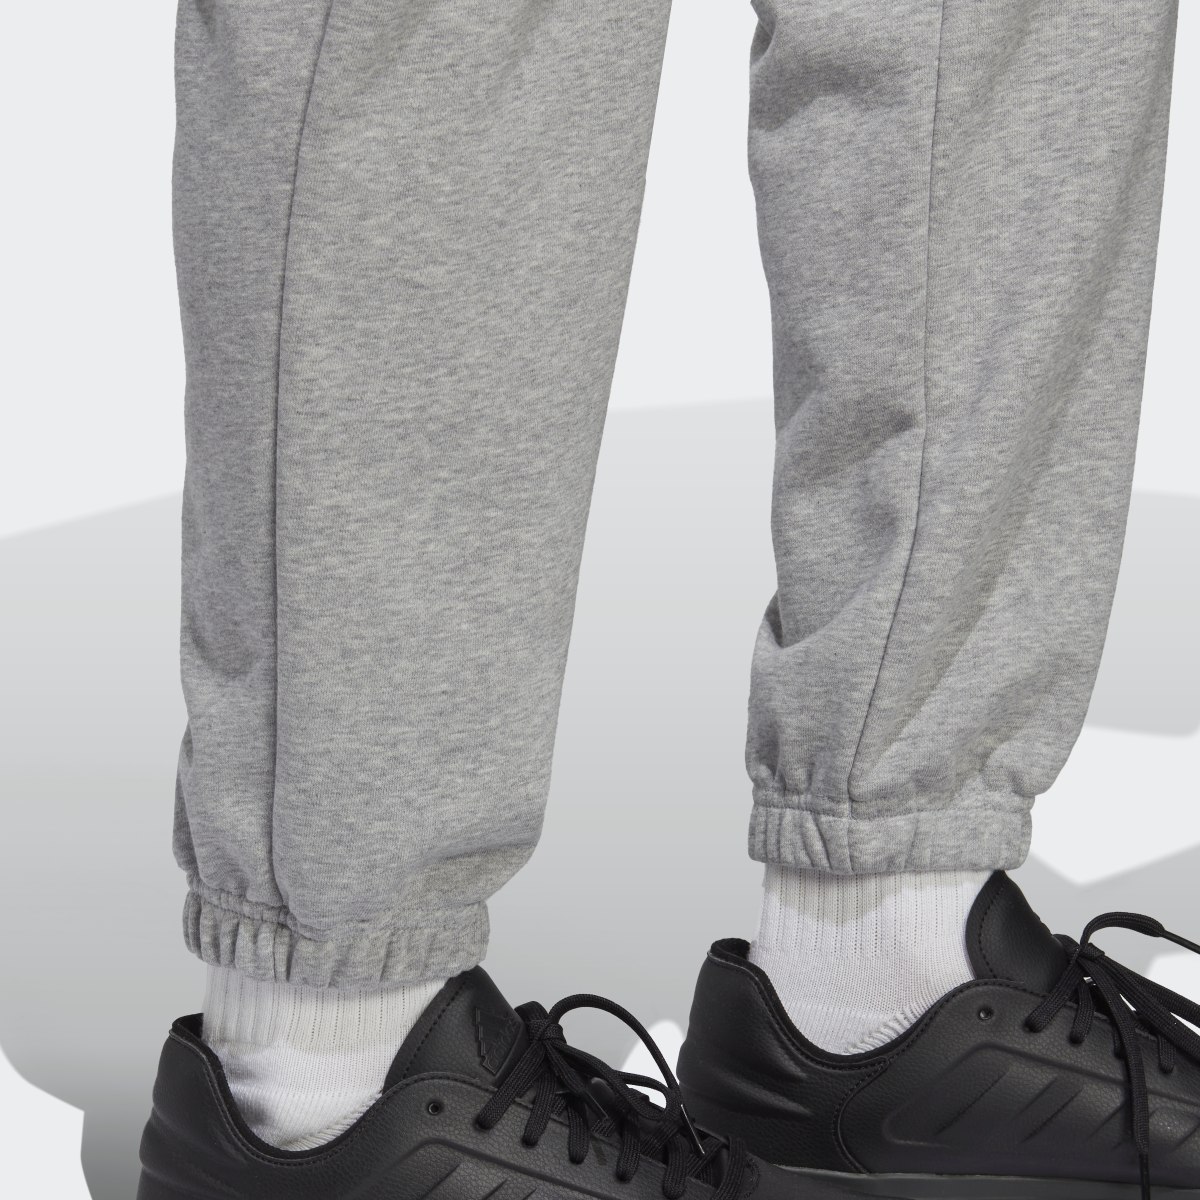 Adidas ALL SZN French Terry Pants. 6